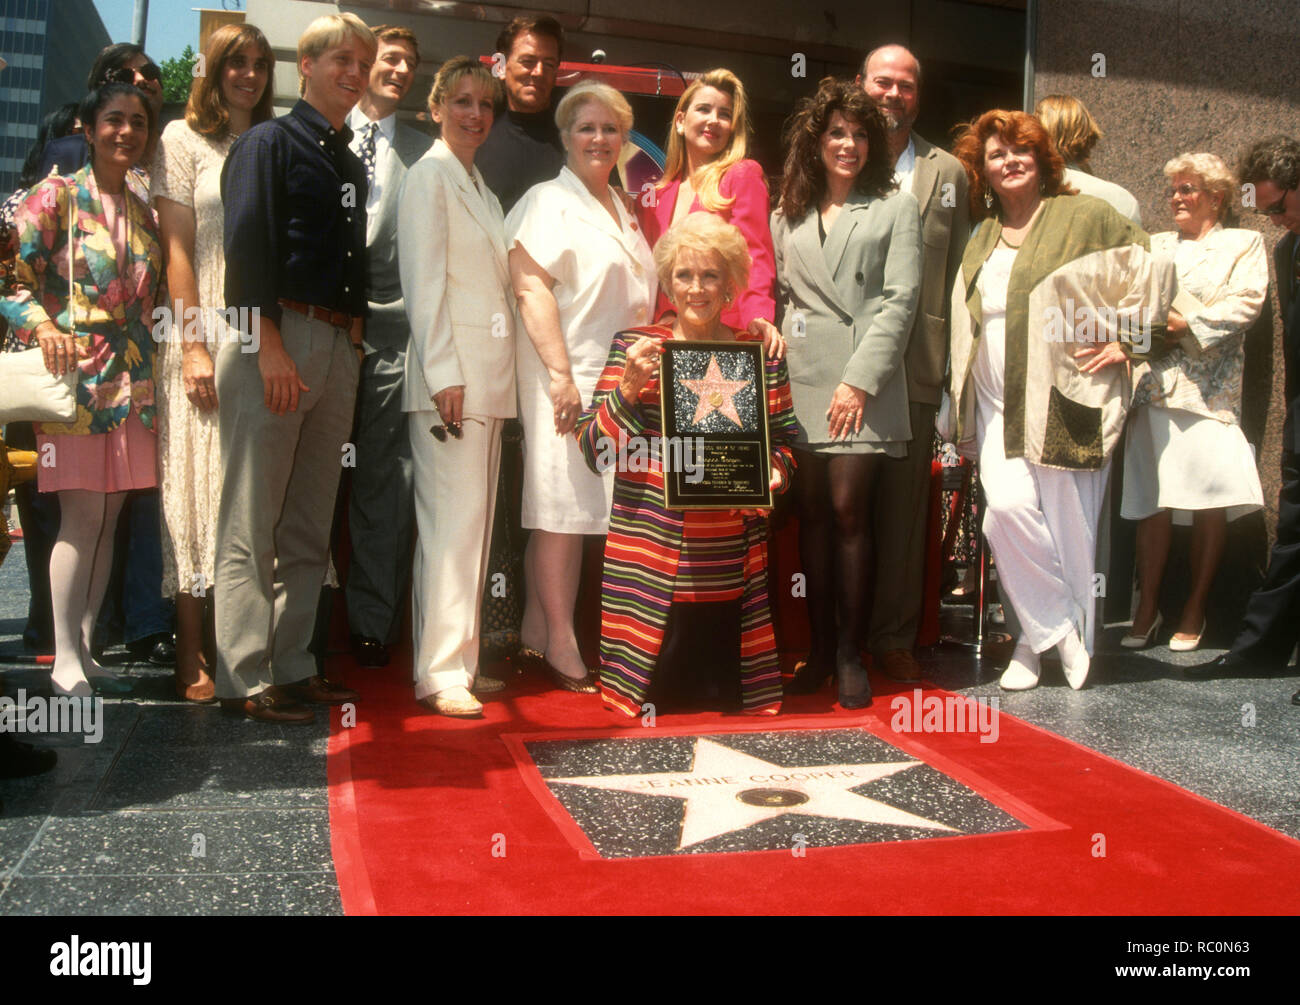 HOLLYWOOD, CA - AUGUST 20: Actor Quinn K. Redeker, actress Jeanne Cooper, actress Melody Thomas Scott, actress Kate Linder, actress Darlene Conley attend Jeanne Cooper receives the 1,987th star on Hollywood Walk of Fame on August 20, 1993 on Hollywood Blvd in Hollywood, California. Photo by Barry King/Alamy Stock Photo Stock Photo